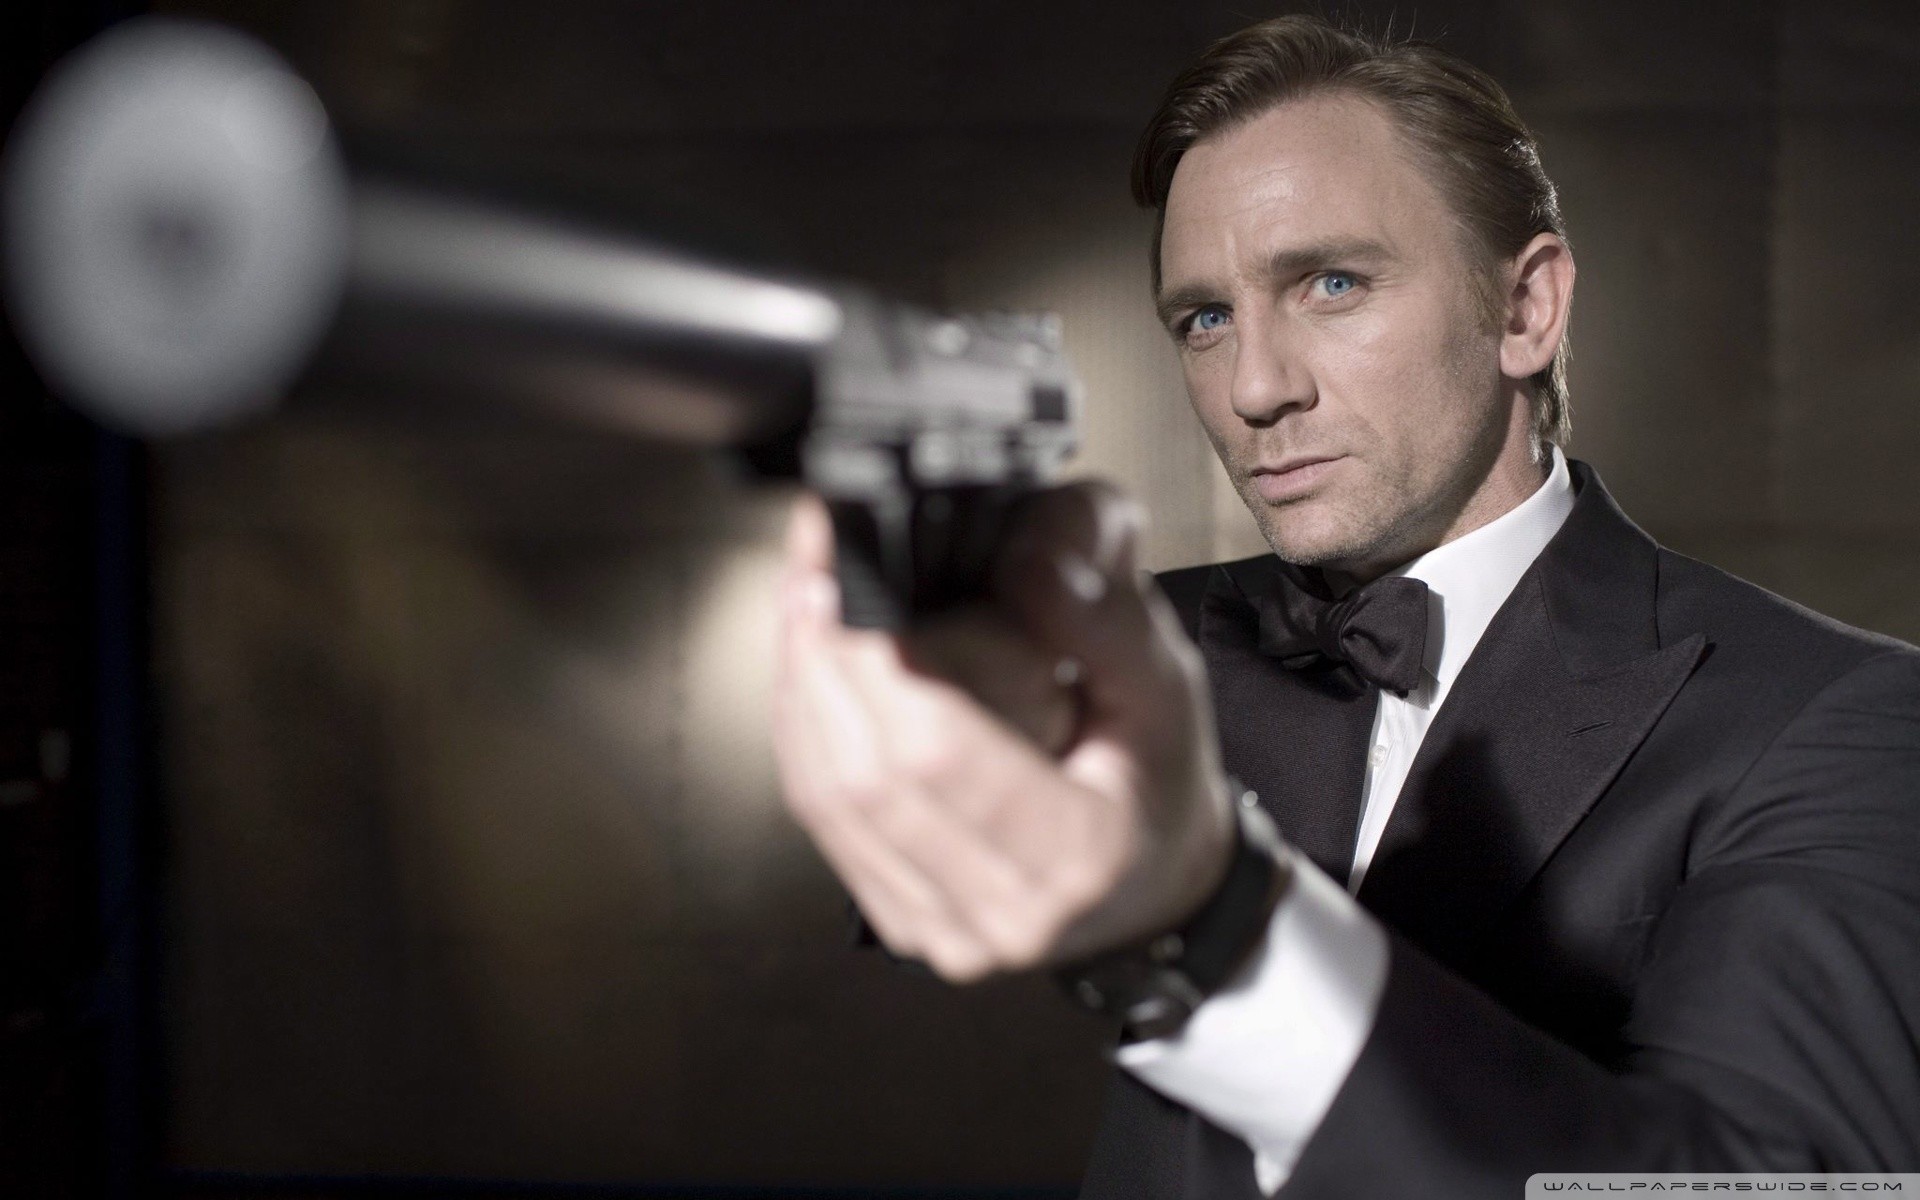 Casino Royale Wallpapers